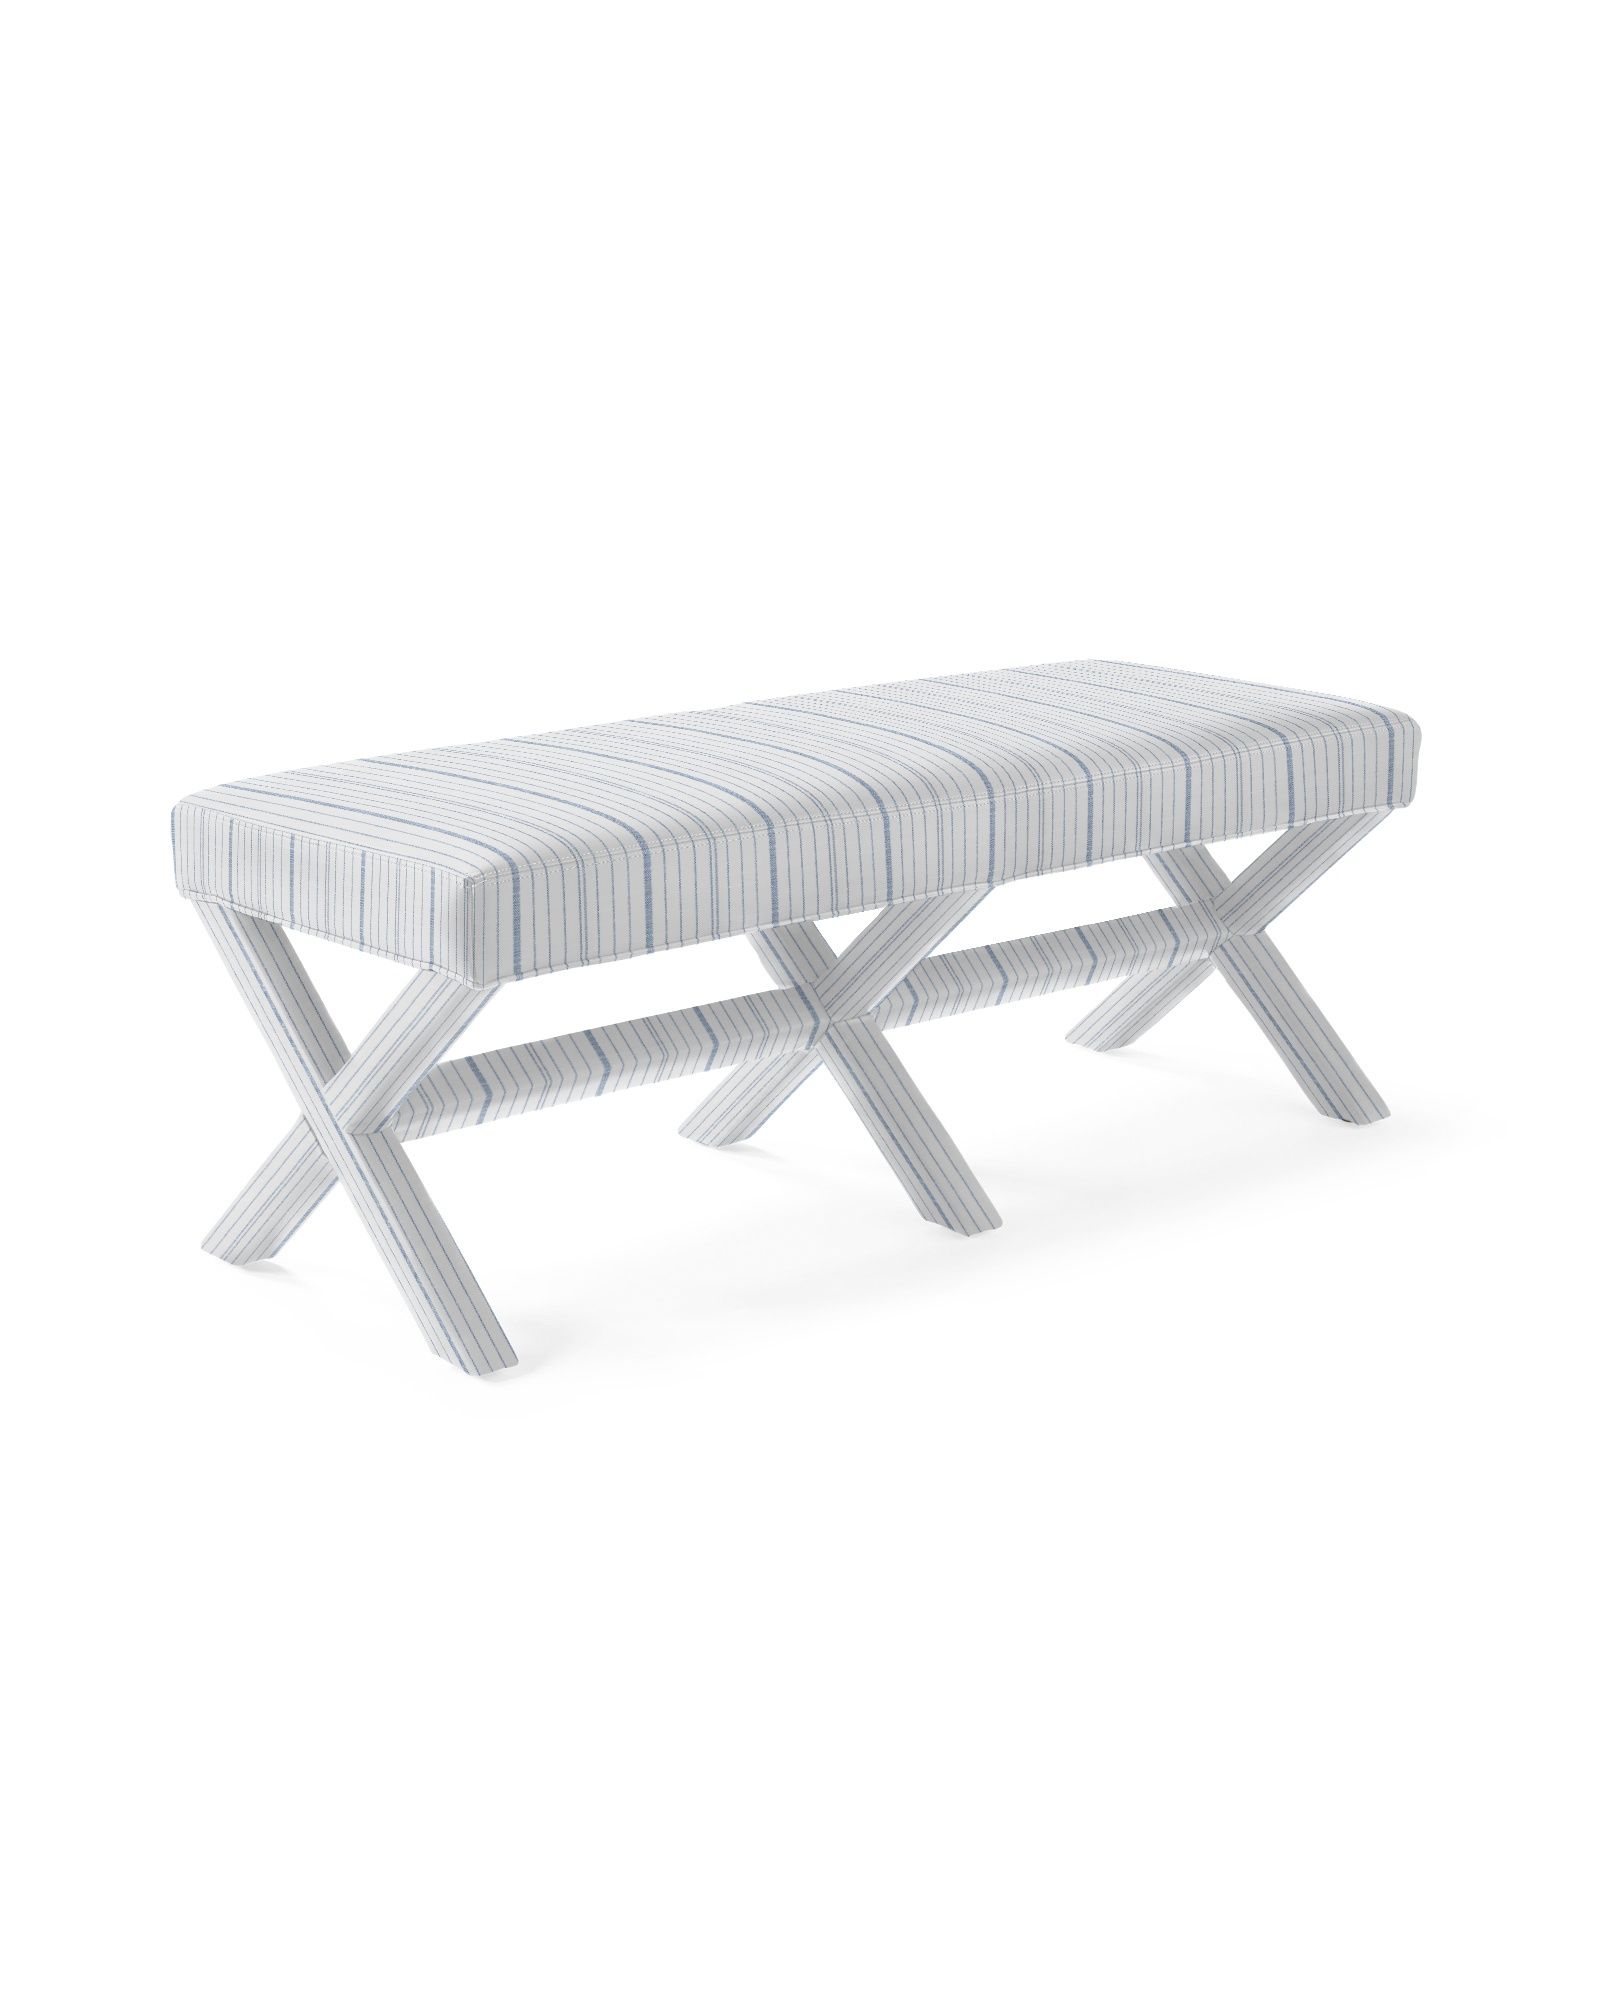 Parker 52" Bench | Serena and Lily